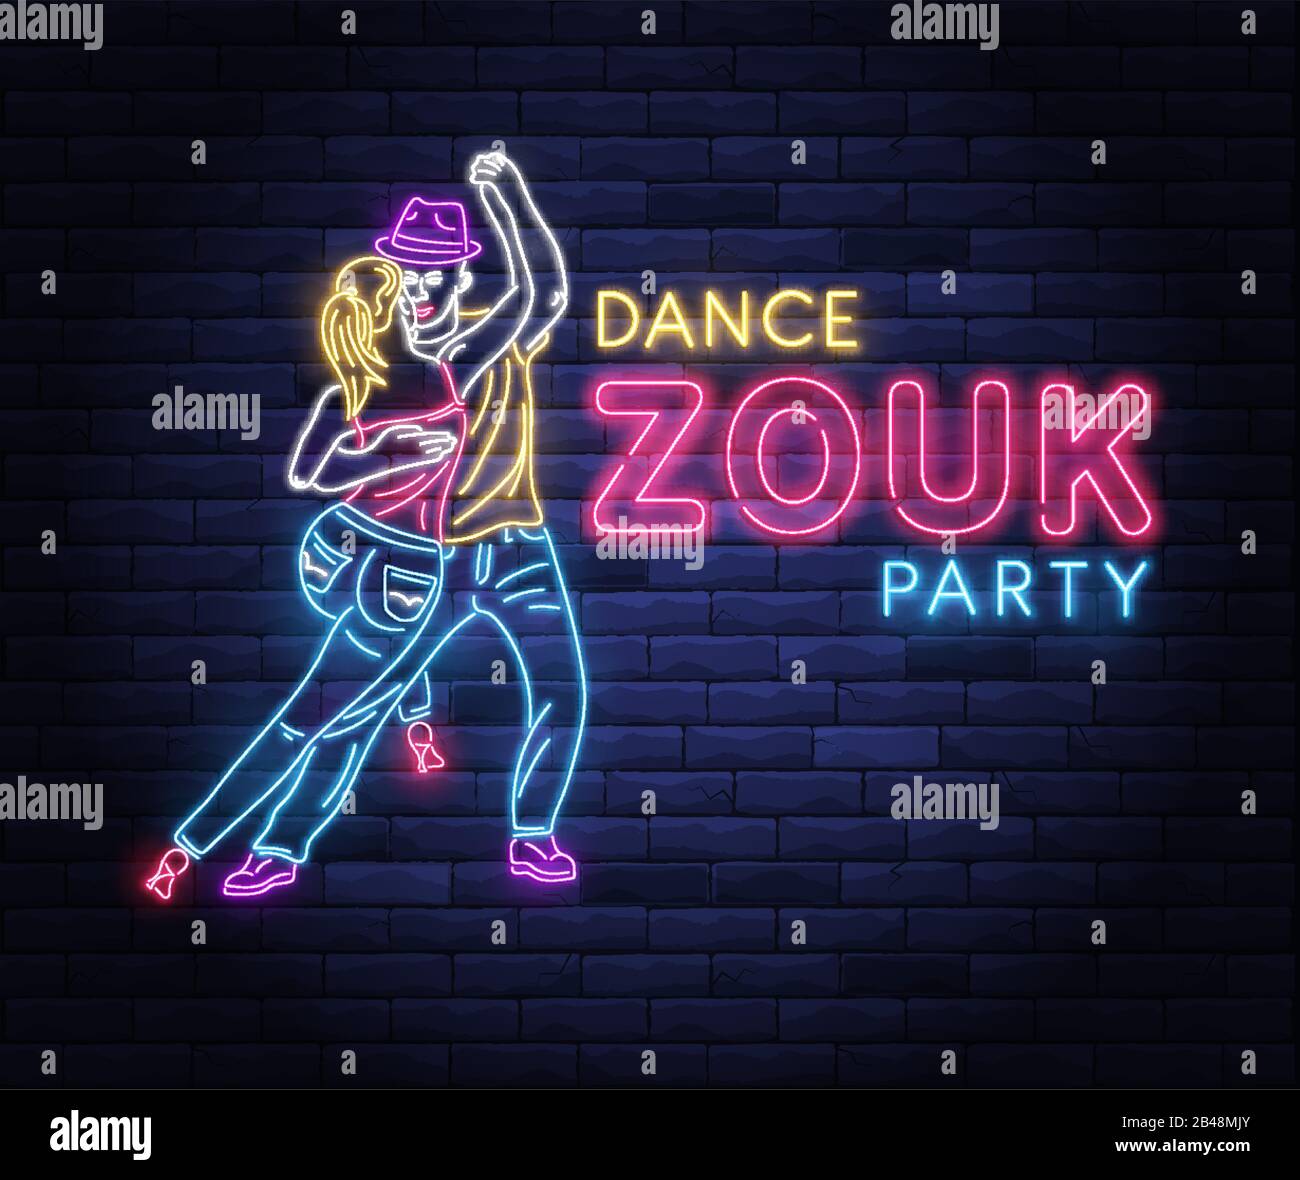 Zouk dance party colorful neon banner Stock Vector